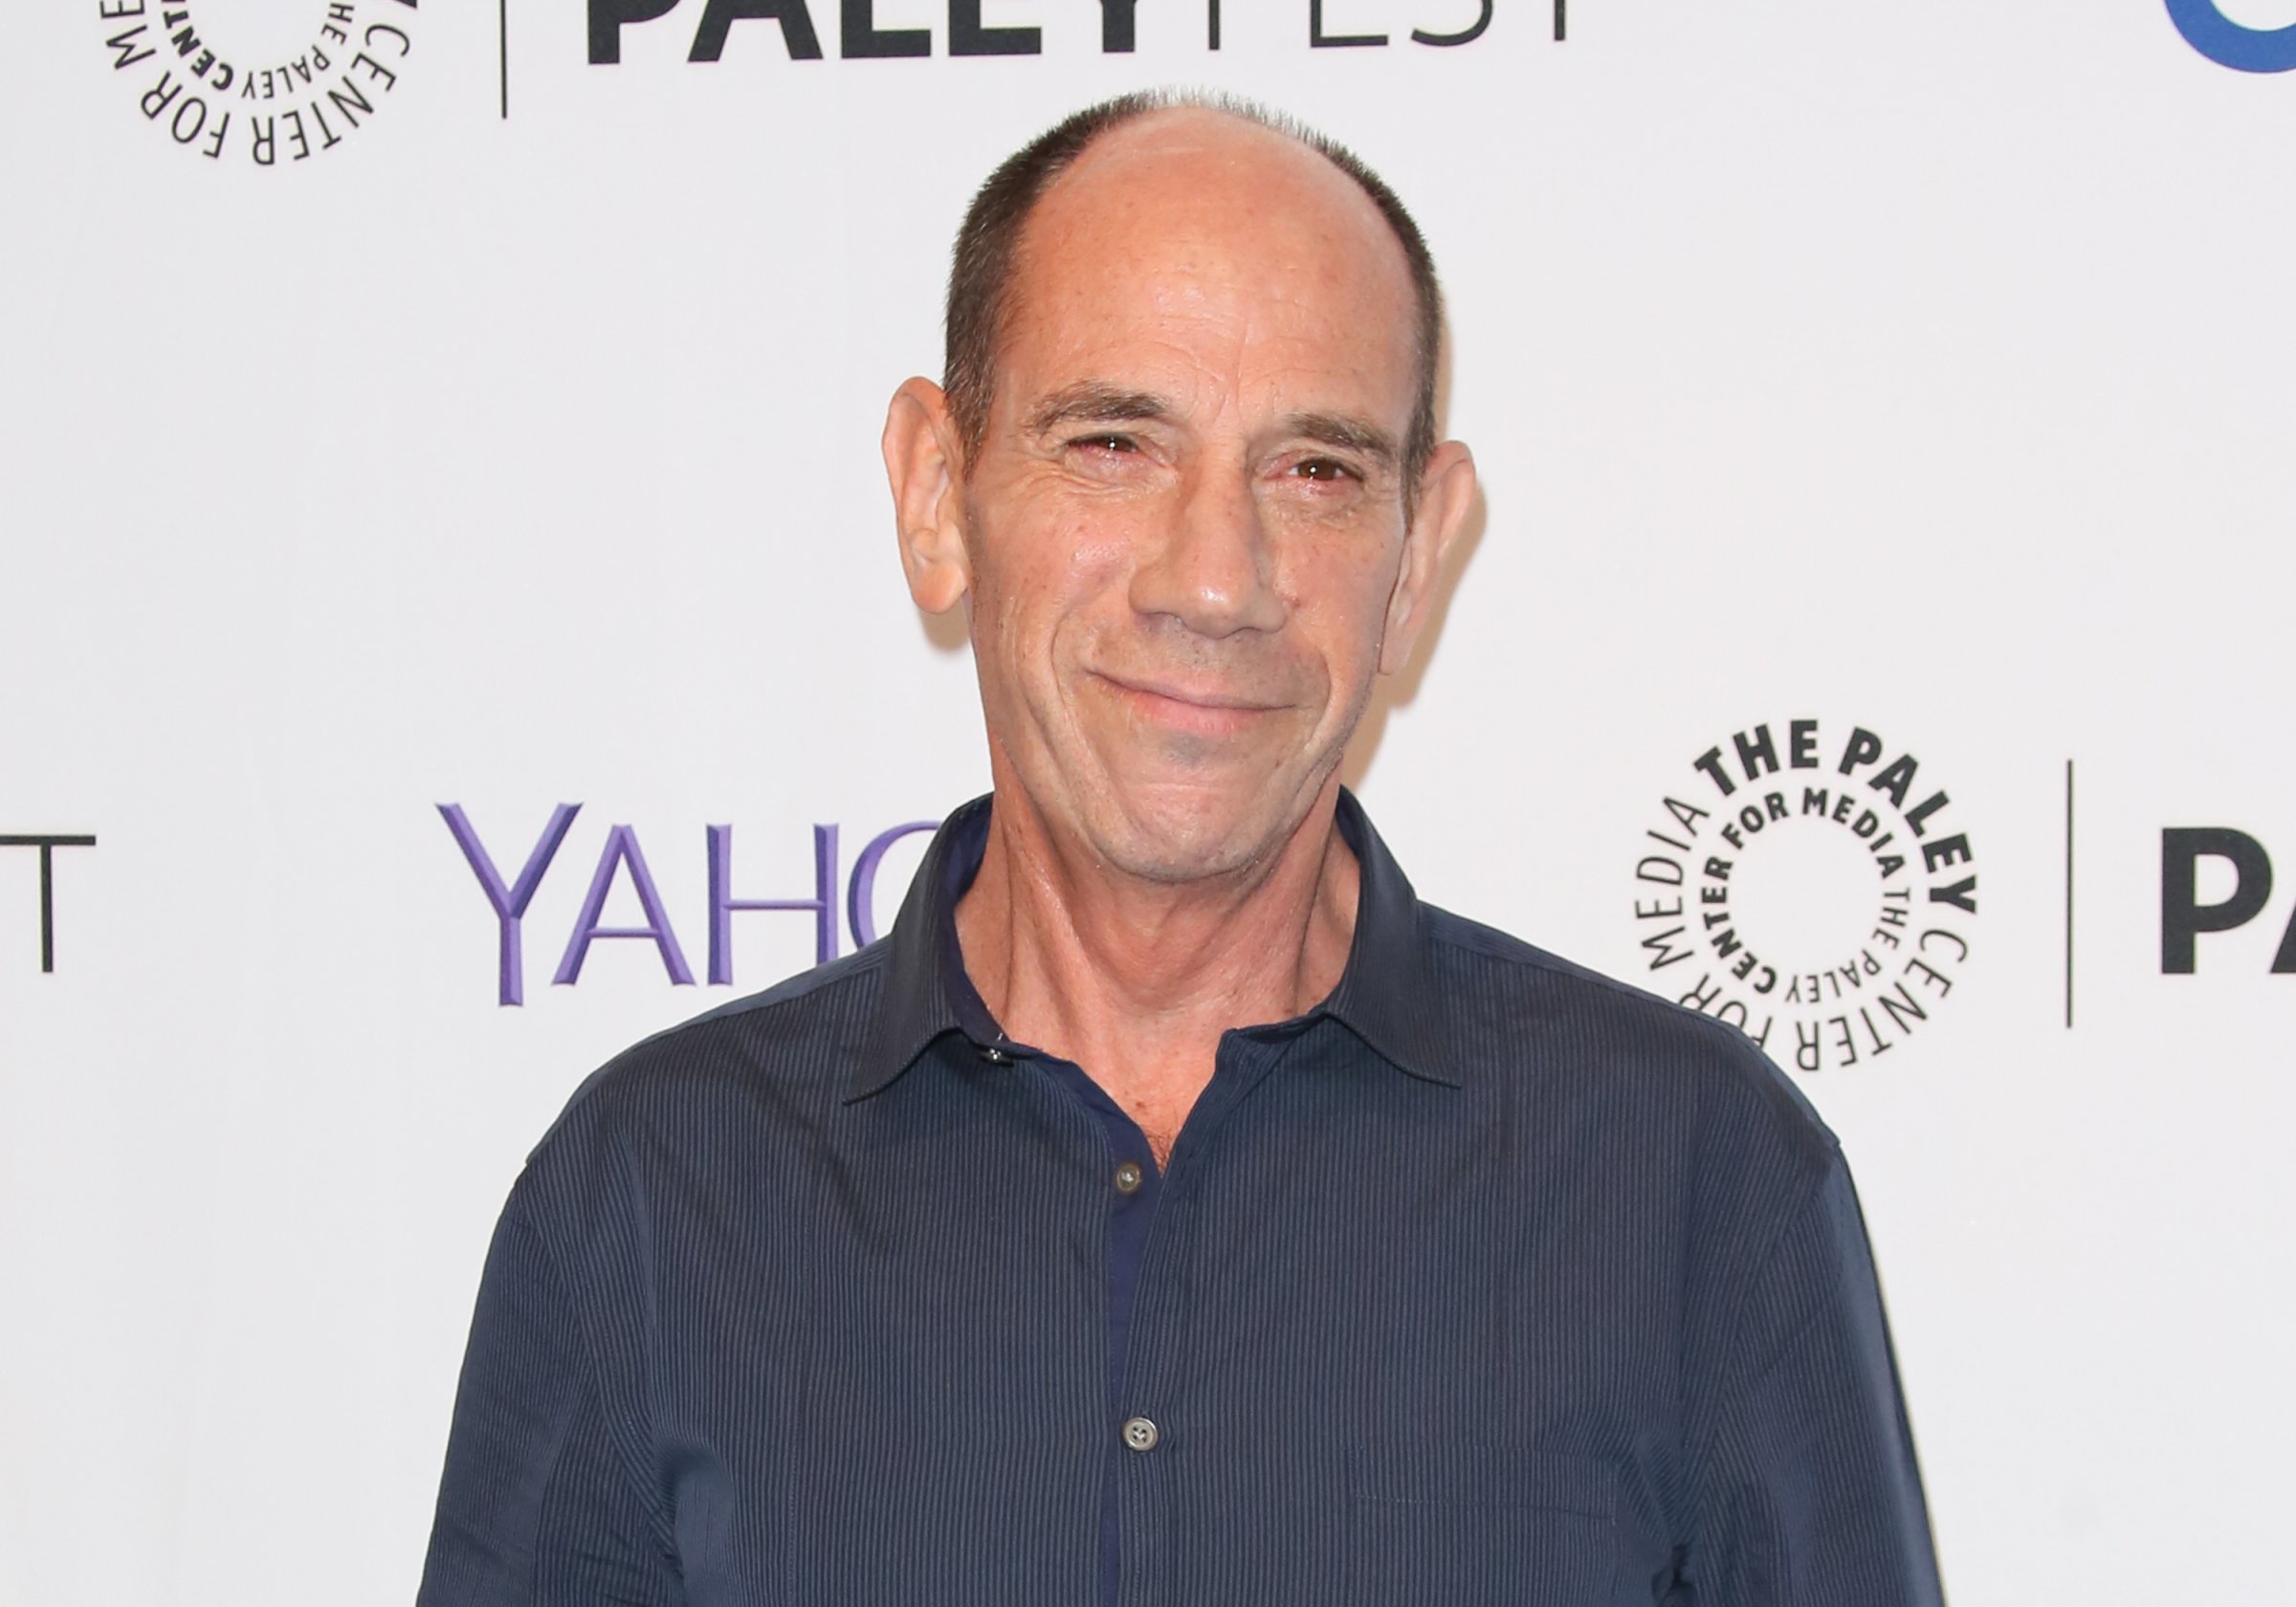 Actor Miguel Ferrer attends the PaleyFest 2015 fall TV preview of "NCIS: Los Angeles" at The Paley Center for Media on September 11, 2015 in Beverly Hills, California.